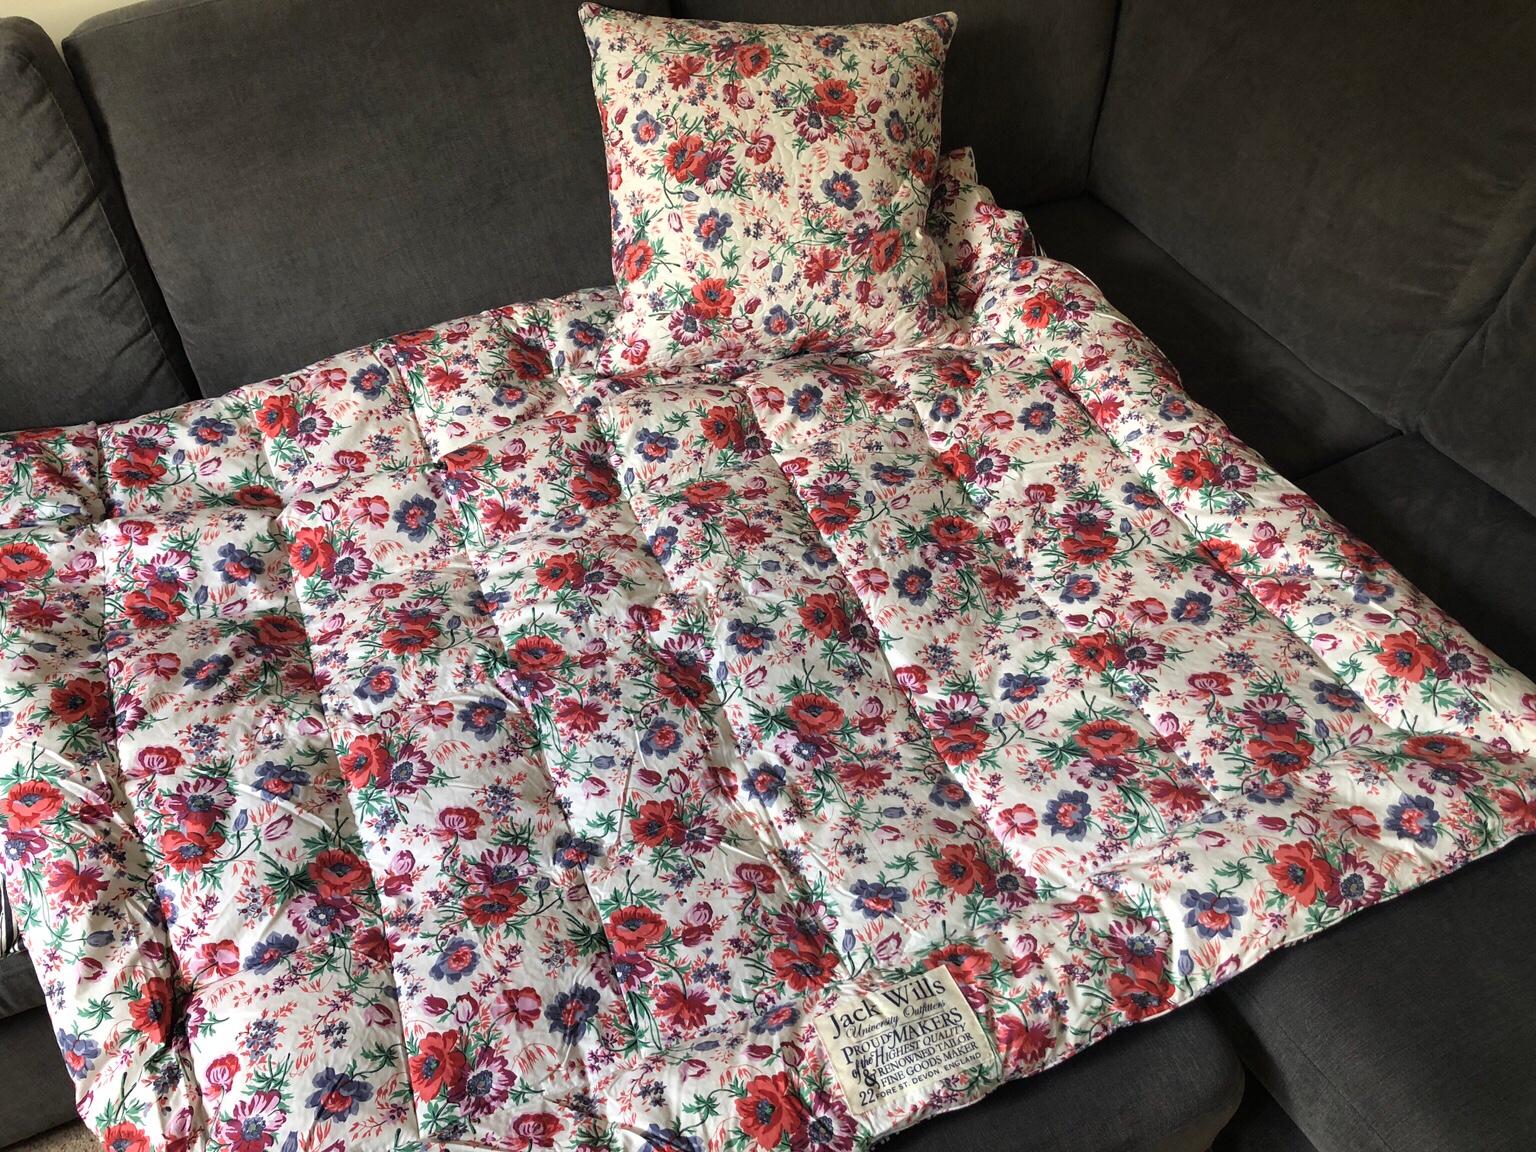 Jack Wills Floral Throw And Cushion Rrp 200 In Nw7 Barnet For